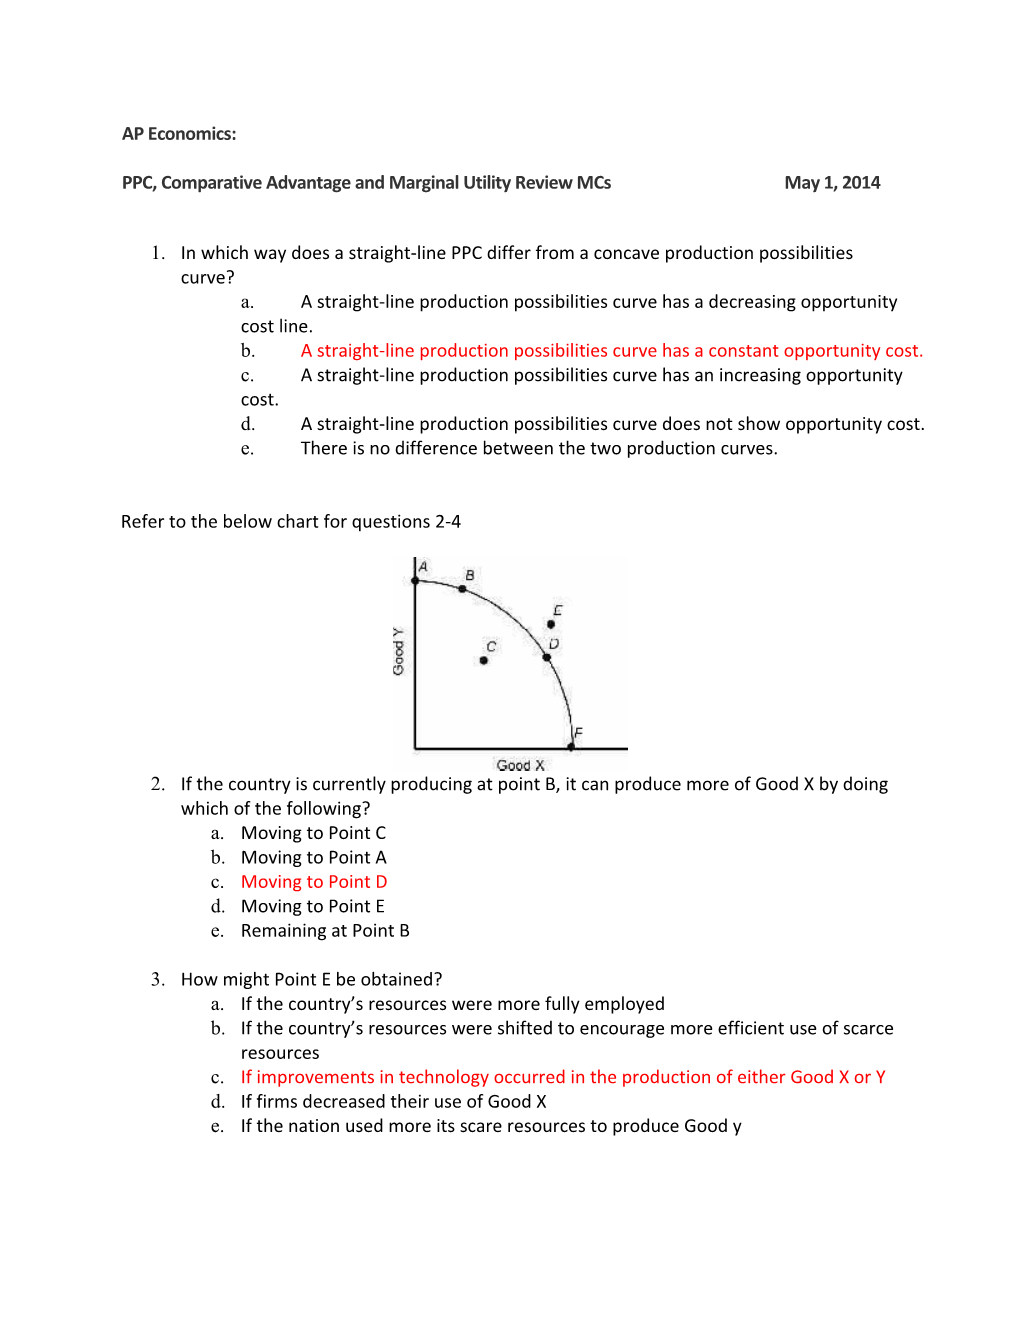 PPC, Comparative Advantage and Marginal Utility Review Mcs May 1, 2014